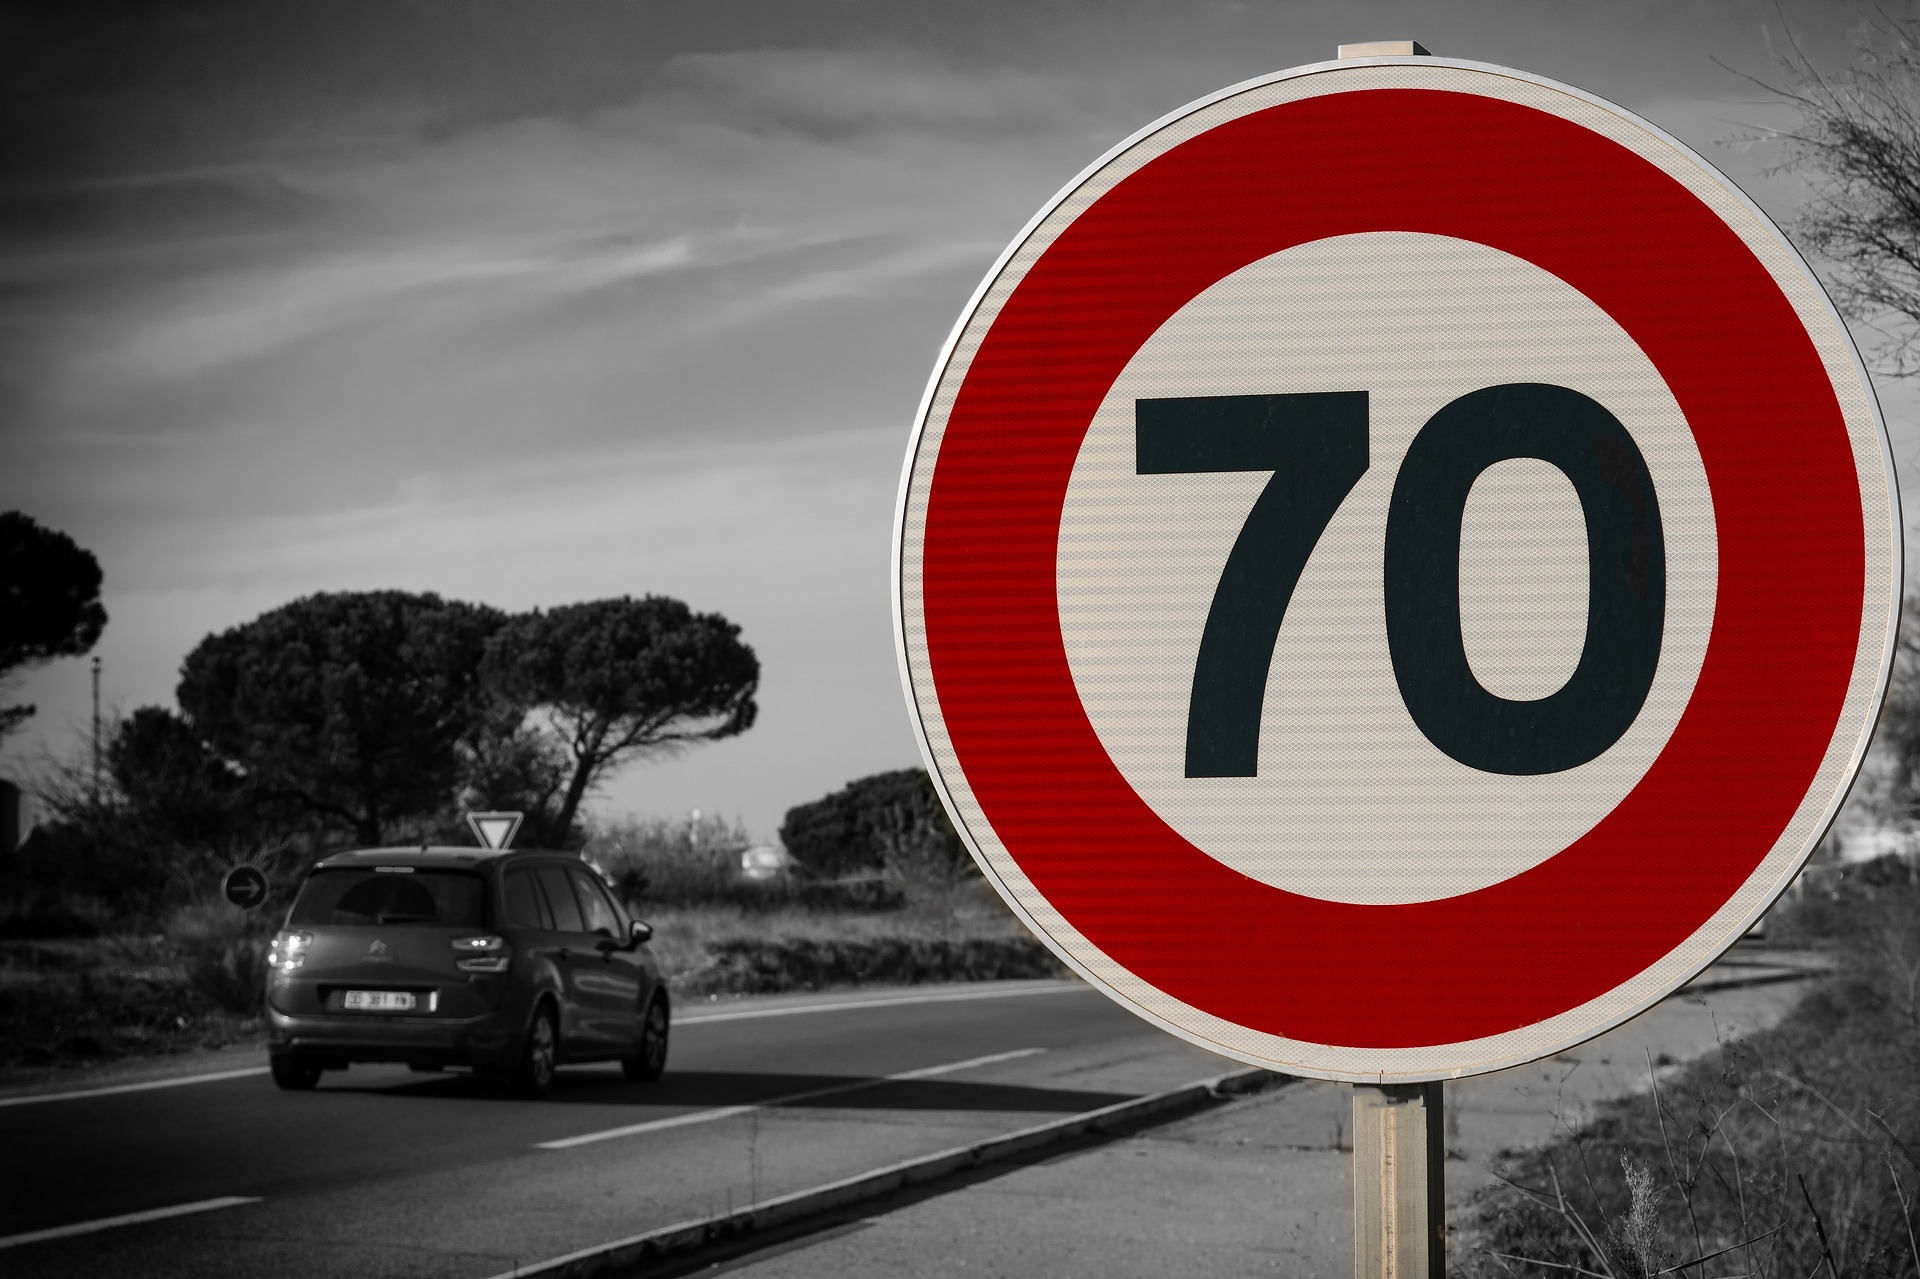 On speed limits, energy waste and ideological nonsense